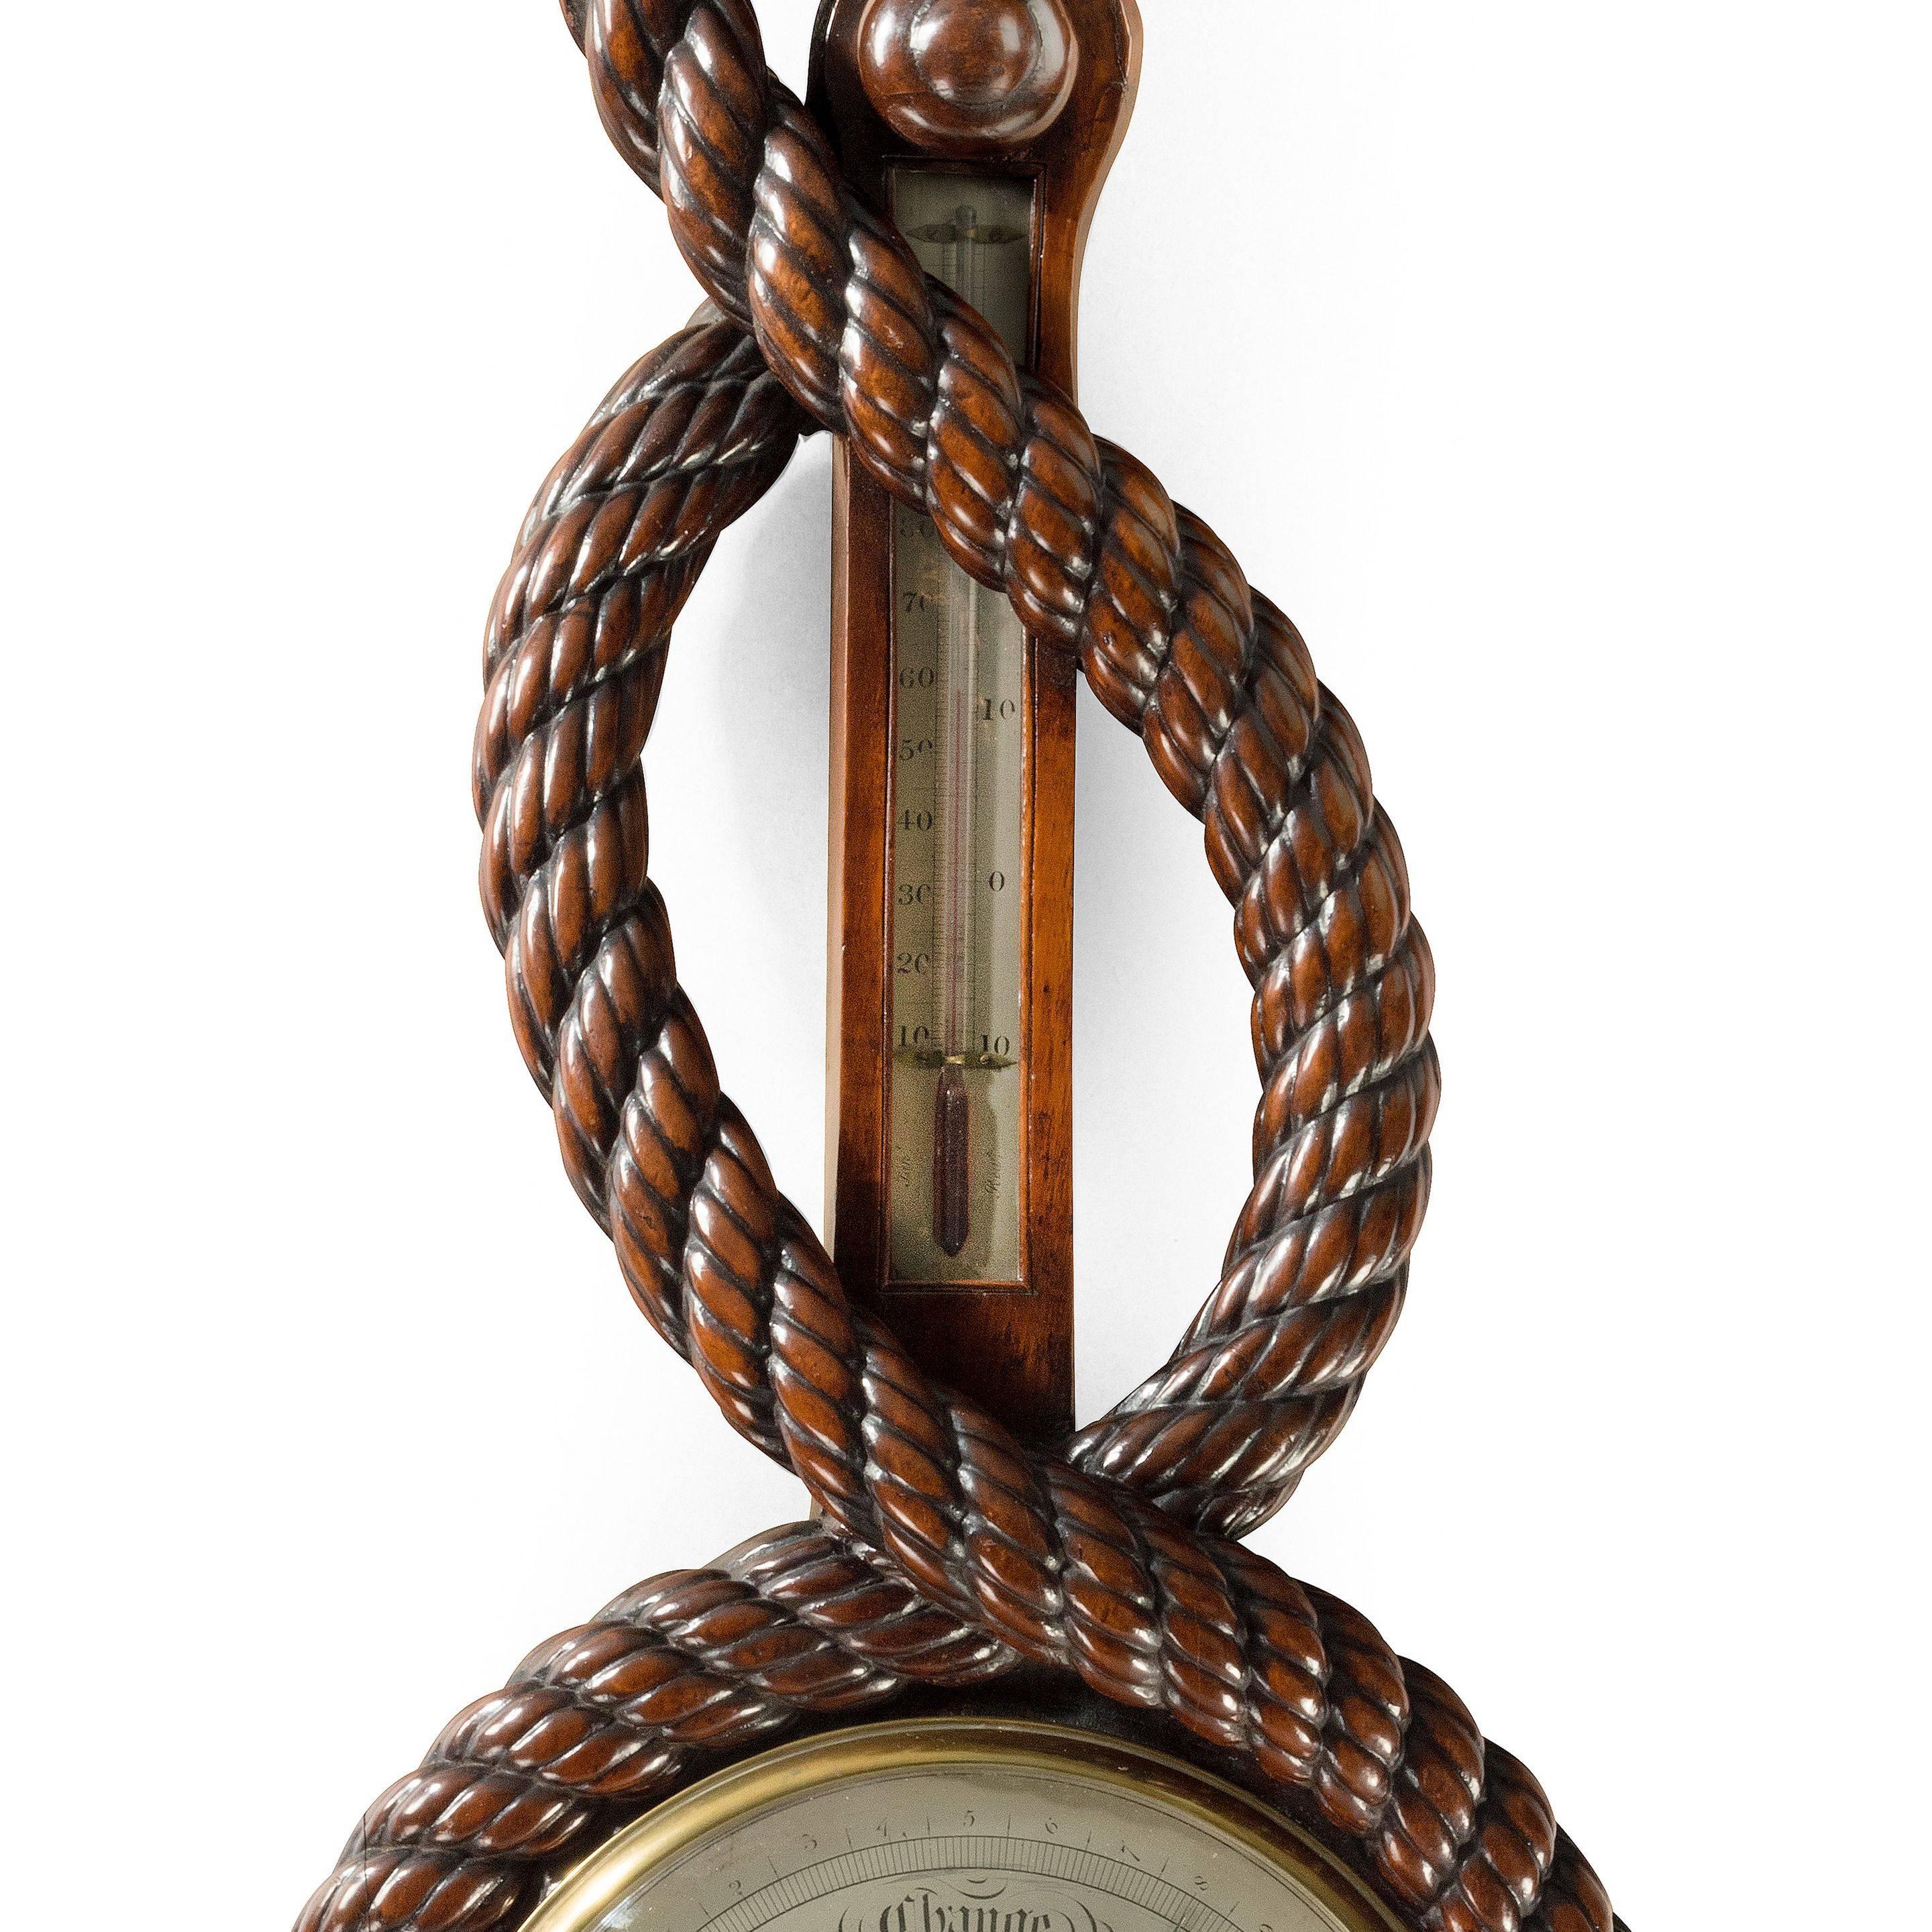 A unusual and large Victorian mahogany barometer by John Gray, in the form of an anchor and twist of rope, the dial inscribed ‘John Gray, 25 & 26 Strand Street, Liverpool’, English, circa 1850. 

John Gray is recorded as working between 1841-1862